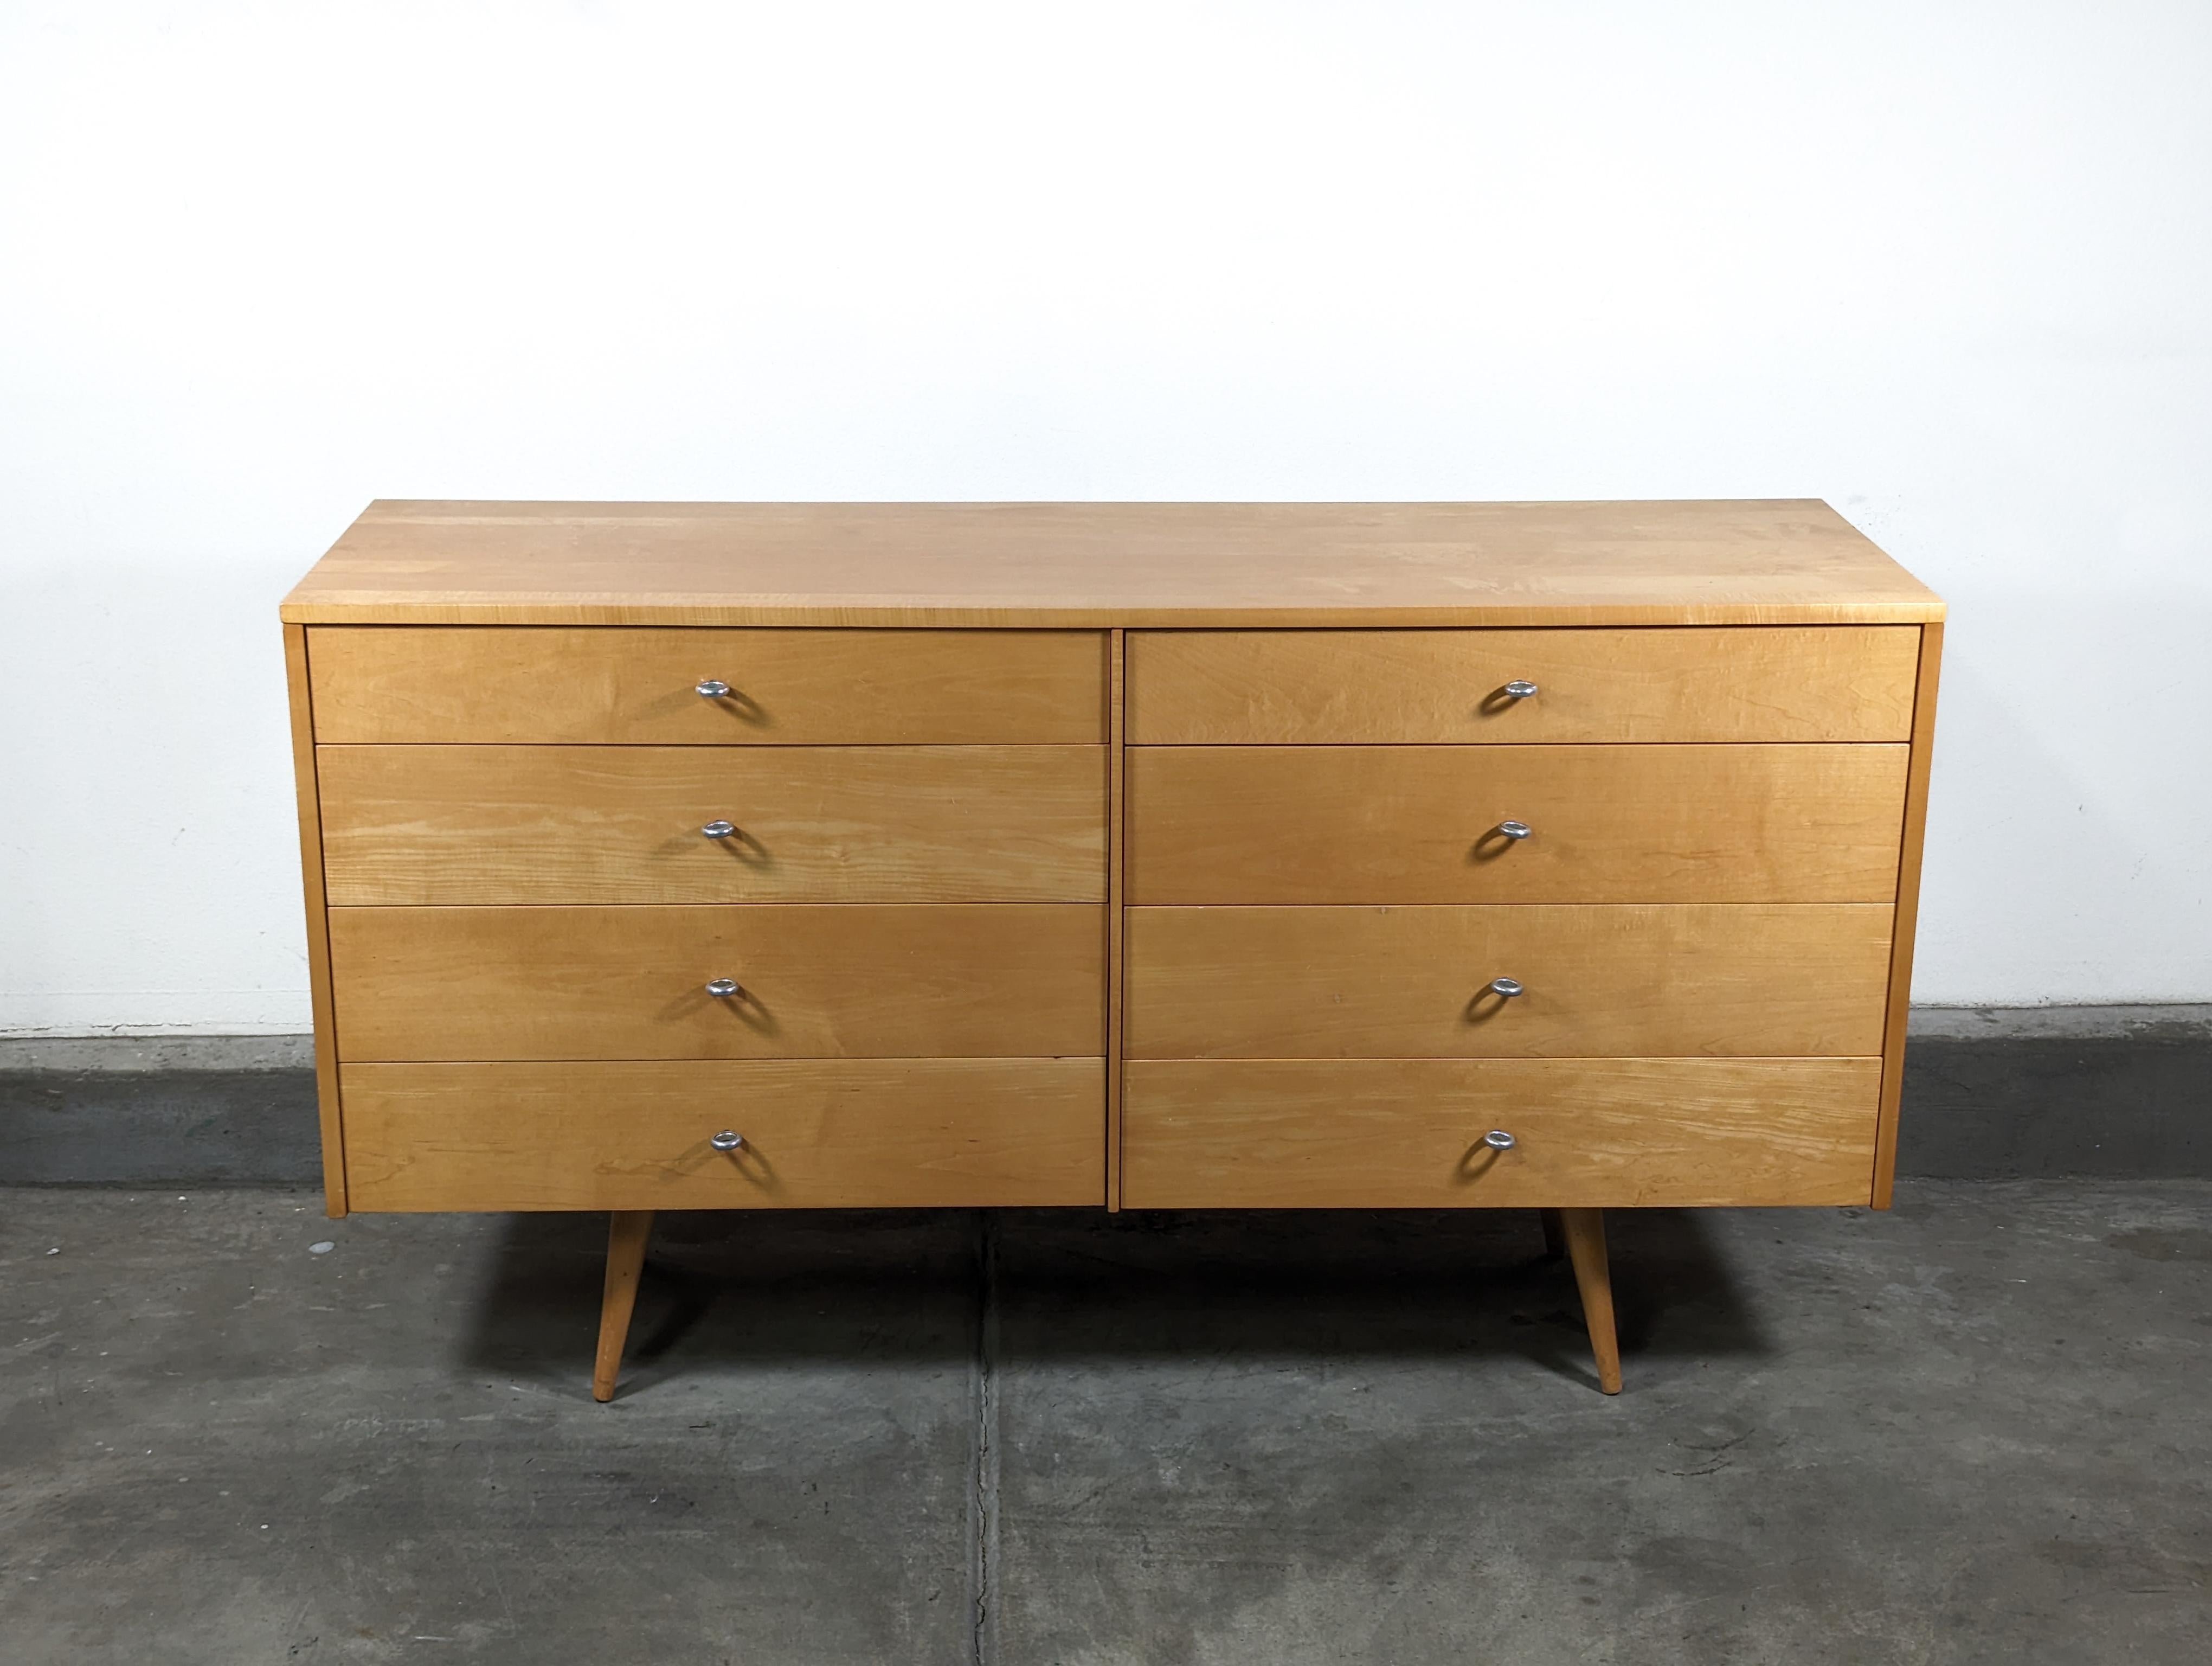 For sale is a stunning mid-century modern dresser designed by the renowned Paul McCobb for his Planner Group collection. Dating back to the 1950s, this piece is not just furniture - it's a slice of design history.

Crafted from solid maple, the